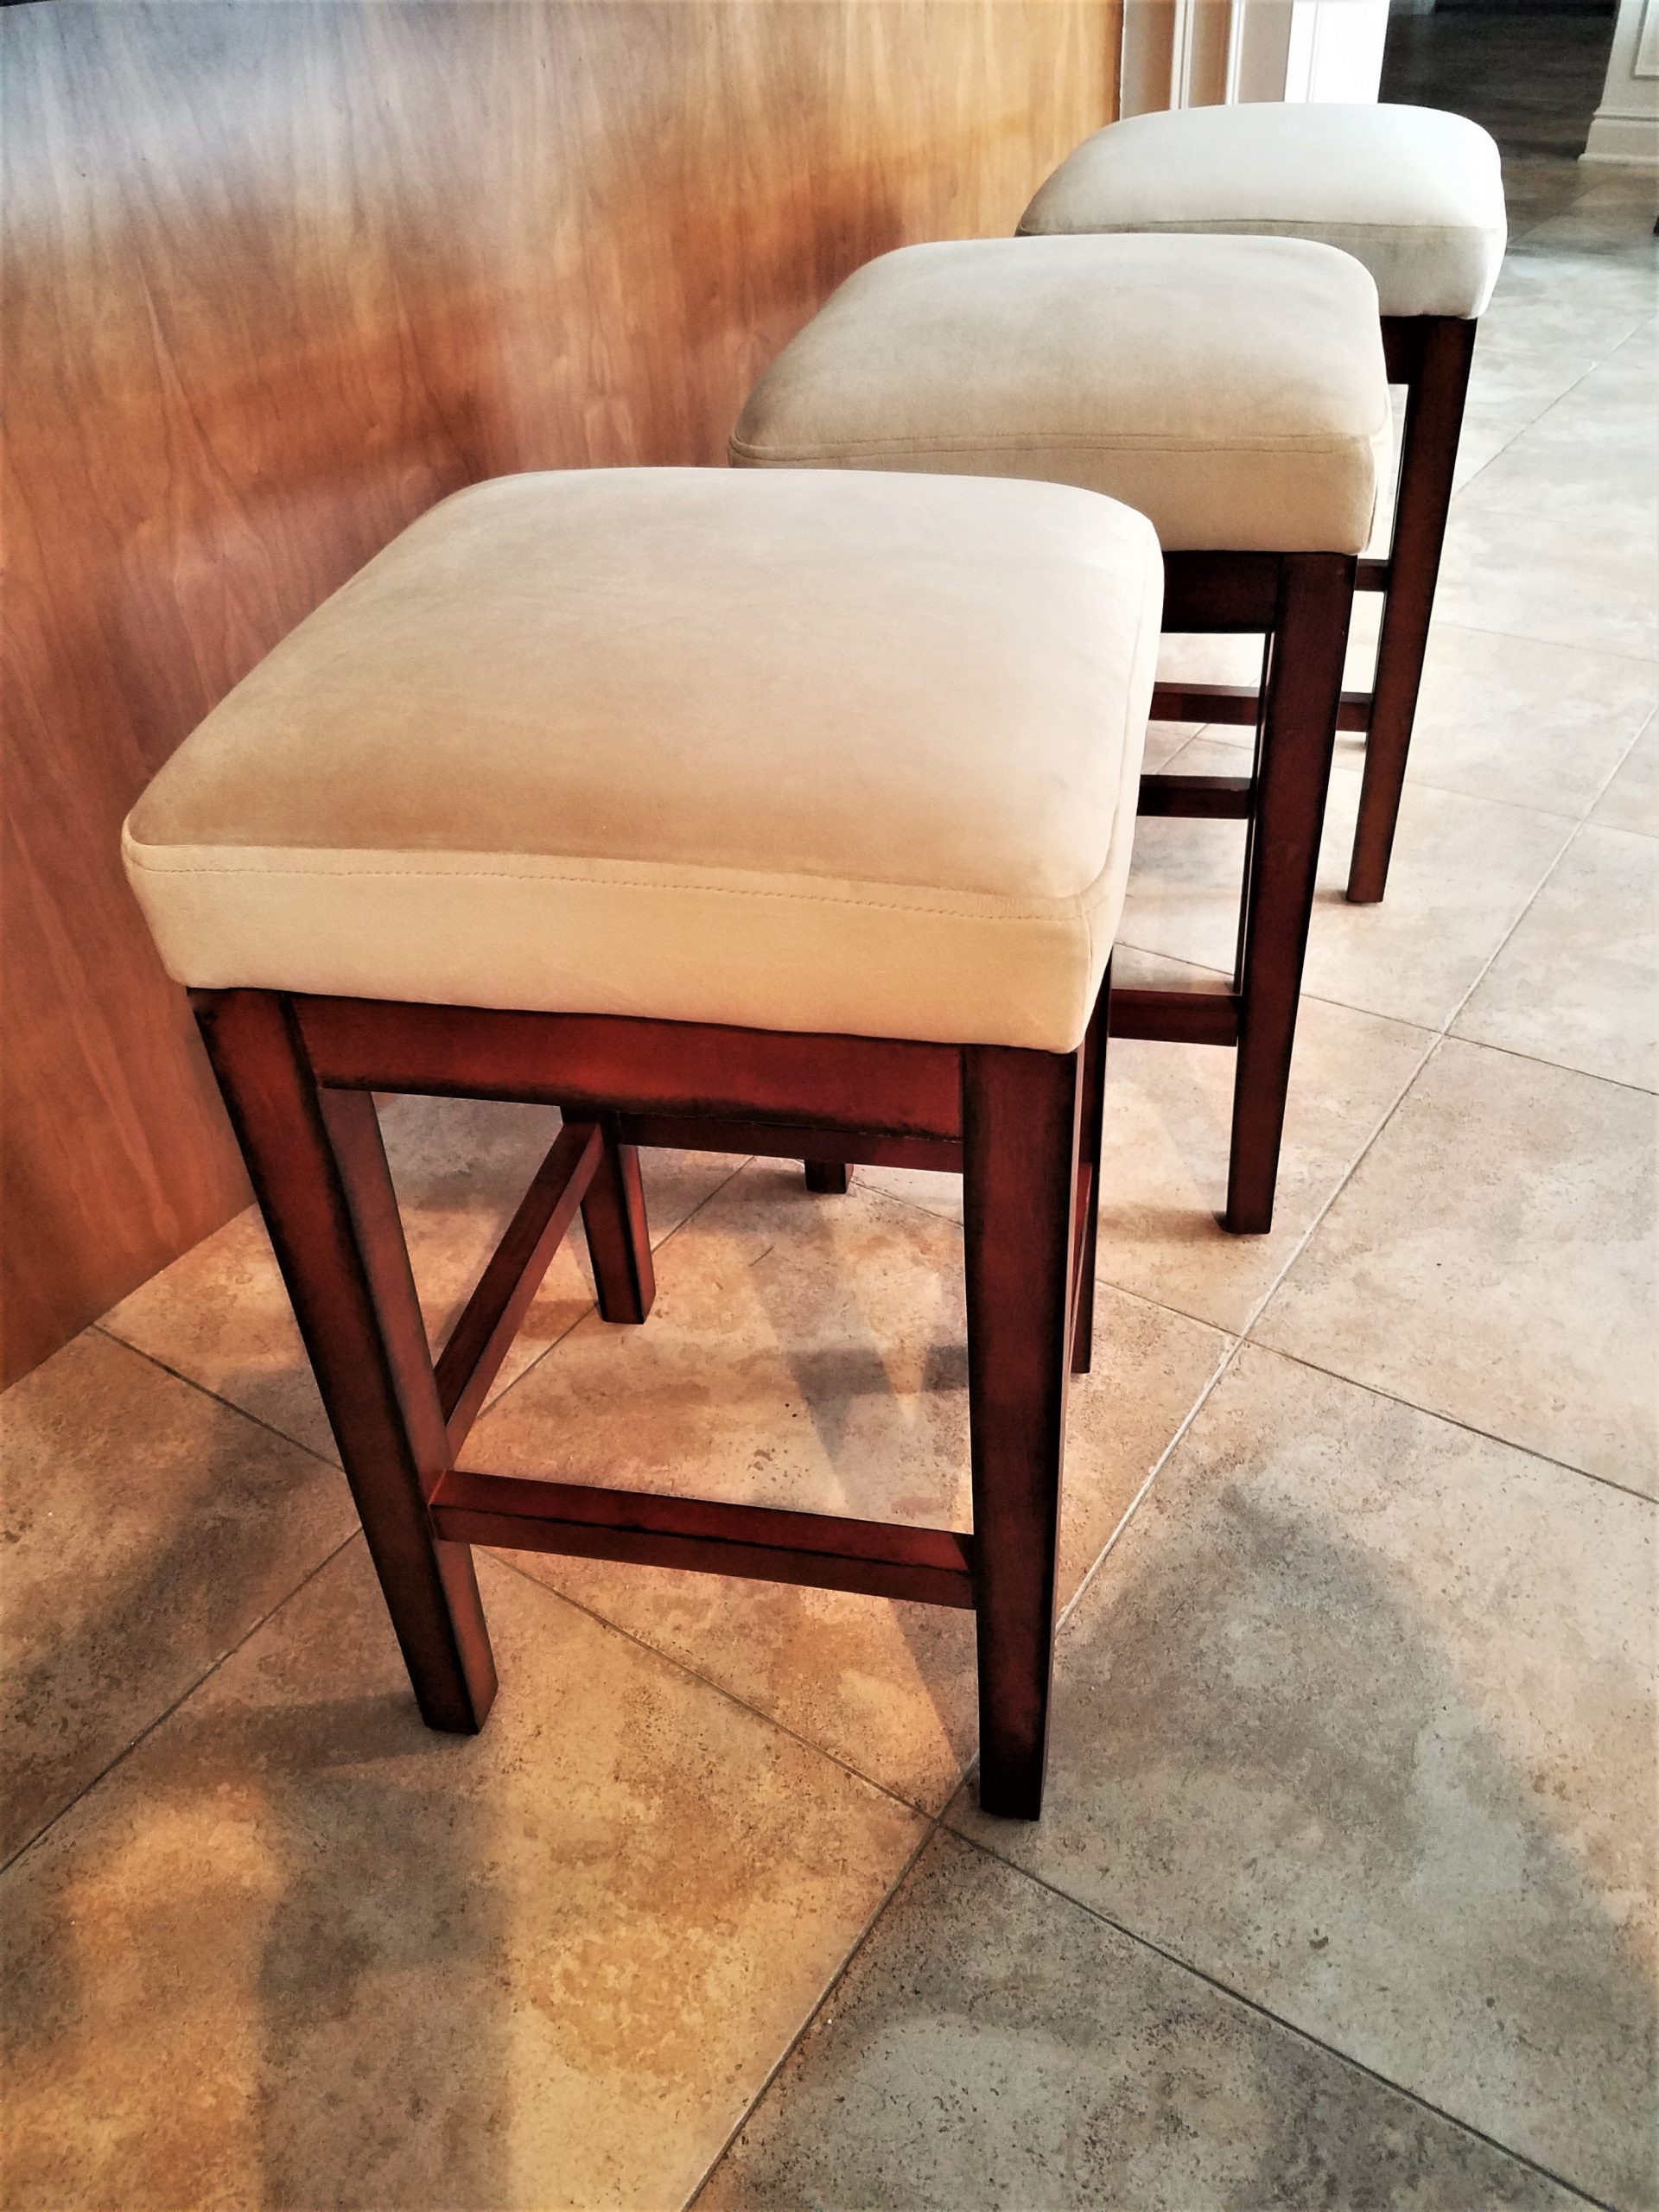 How To Reupholster A Bar Stool Seat, How To Recover Bar Stools